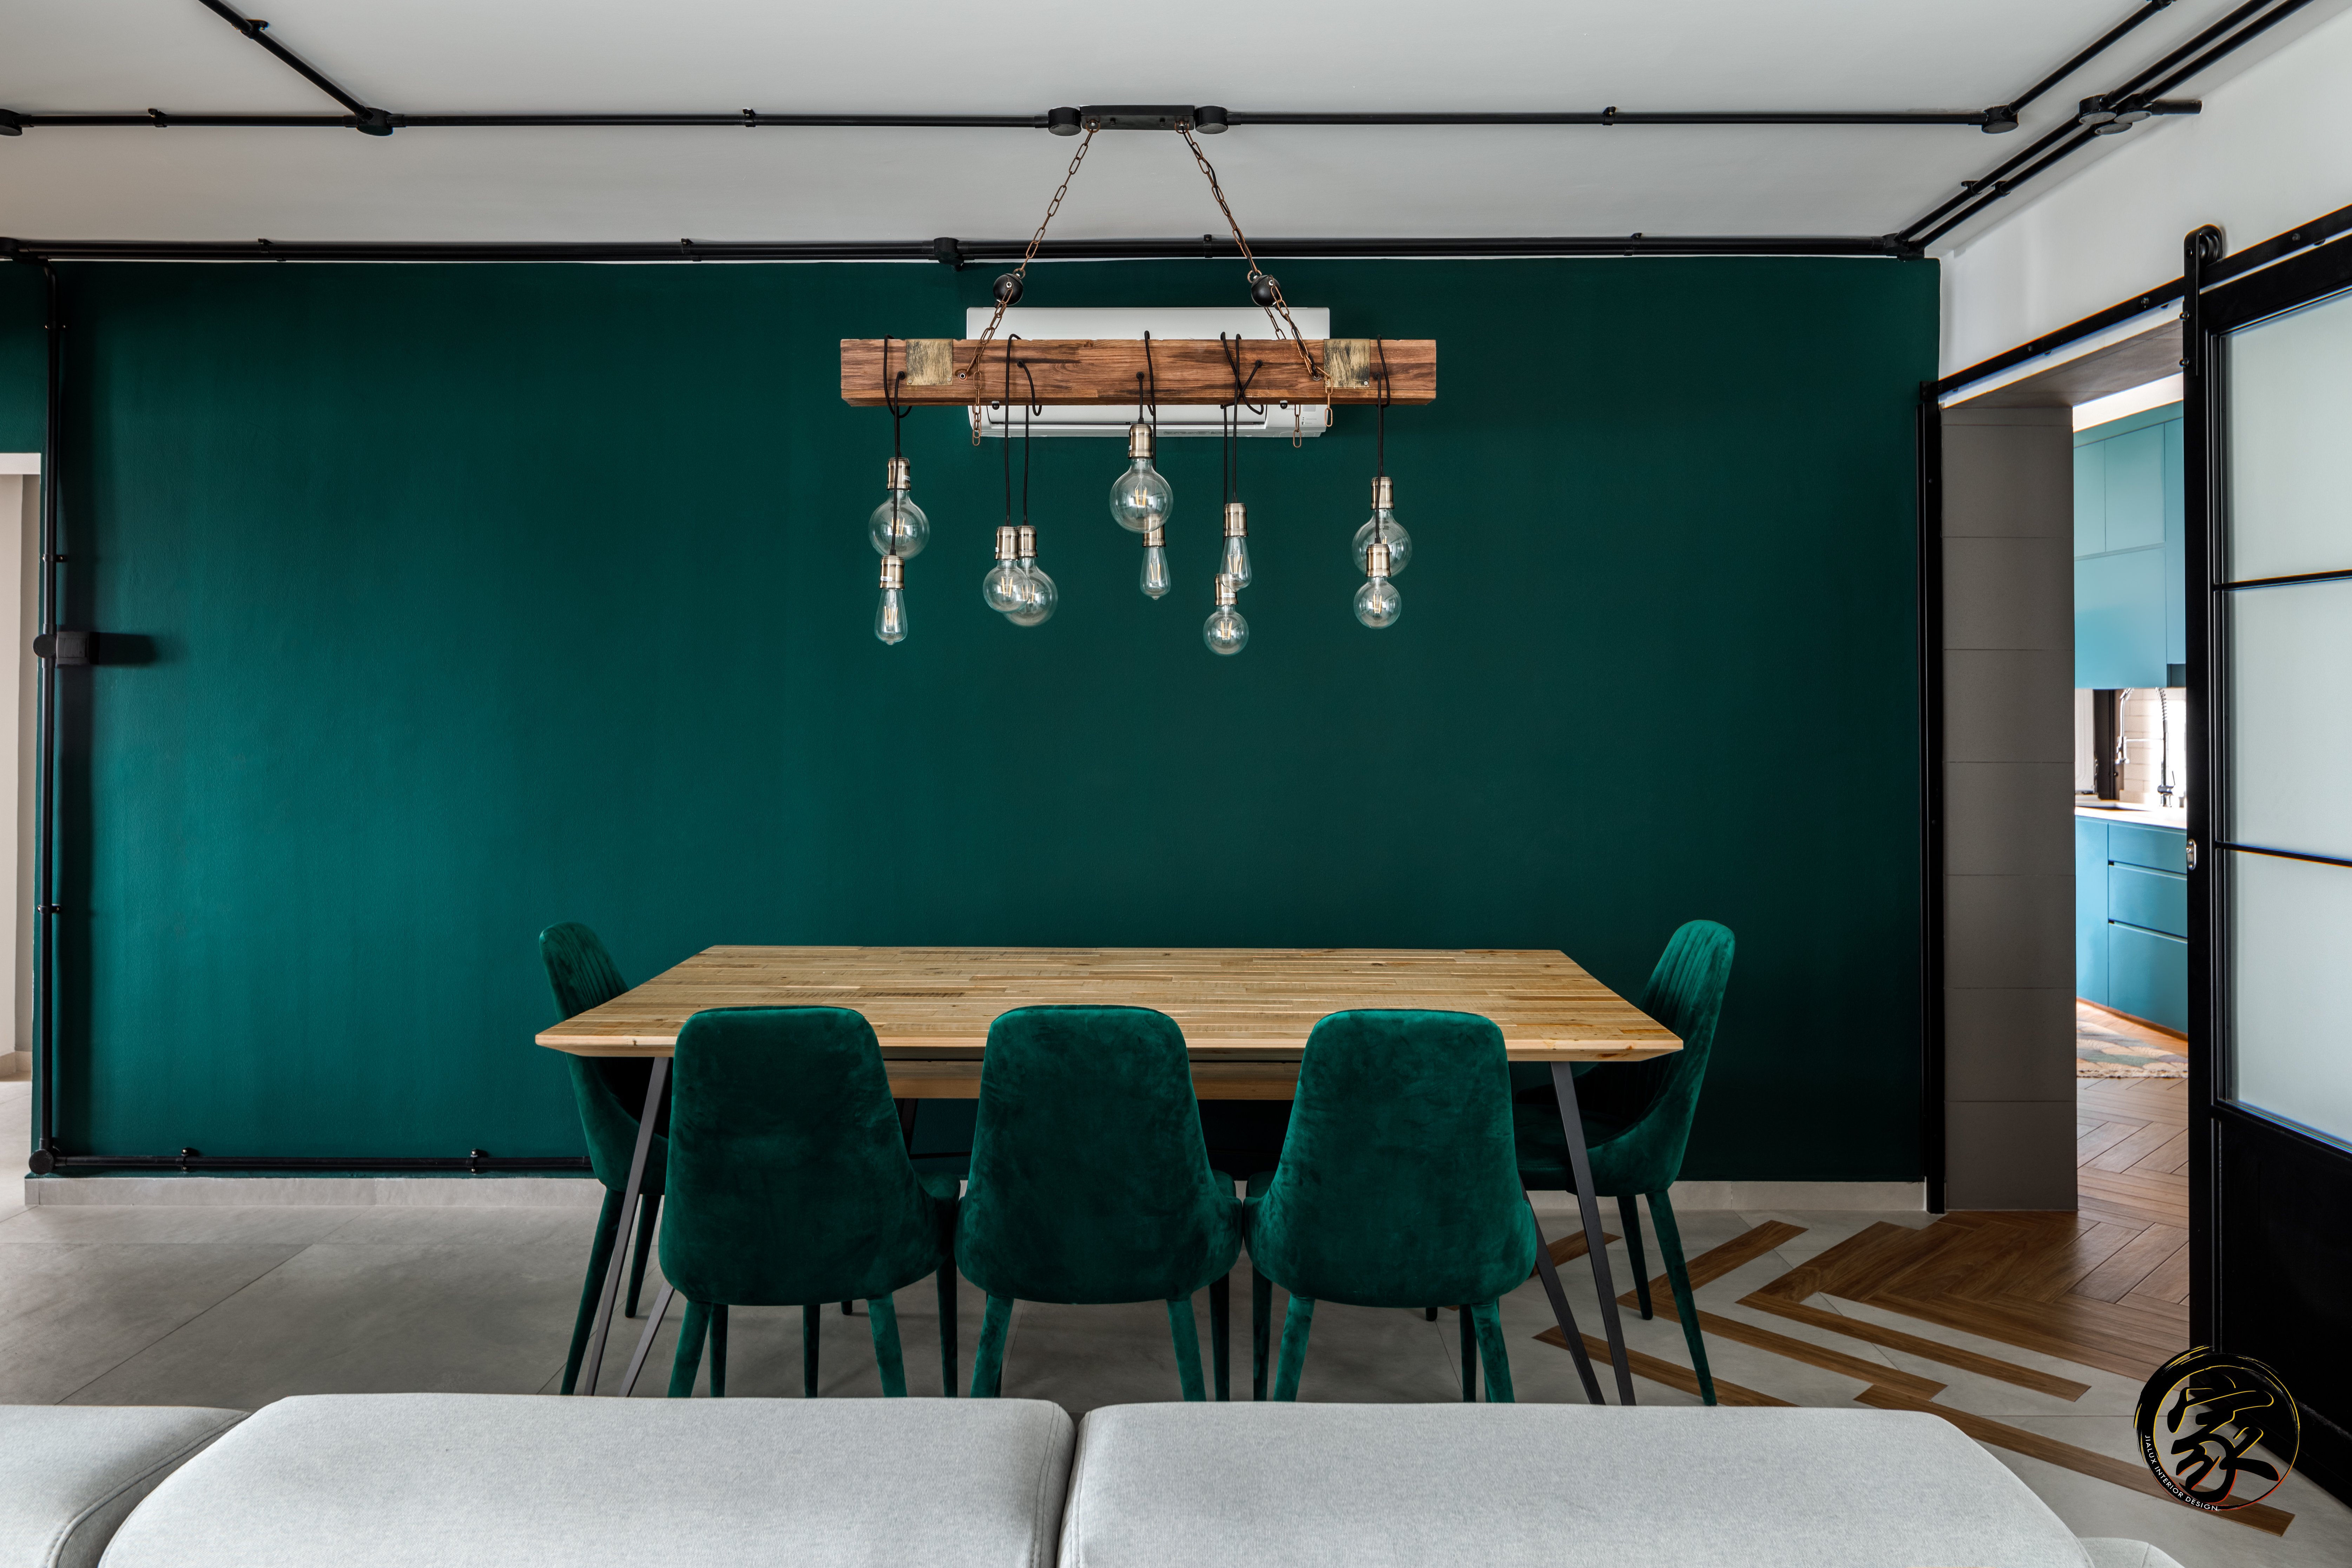 HDB Residential Project Emerald Eclecticism 14